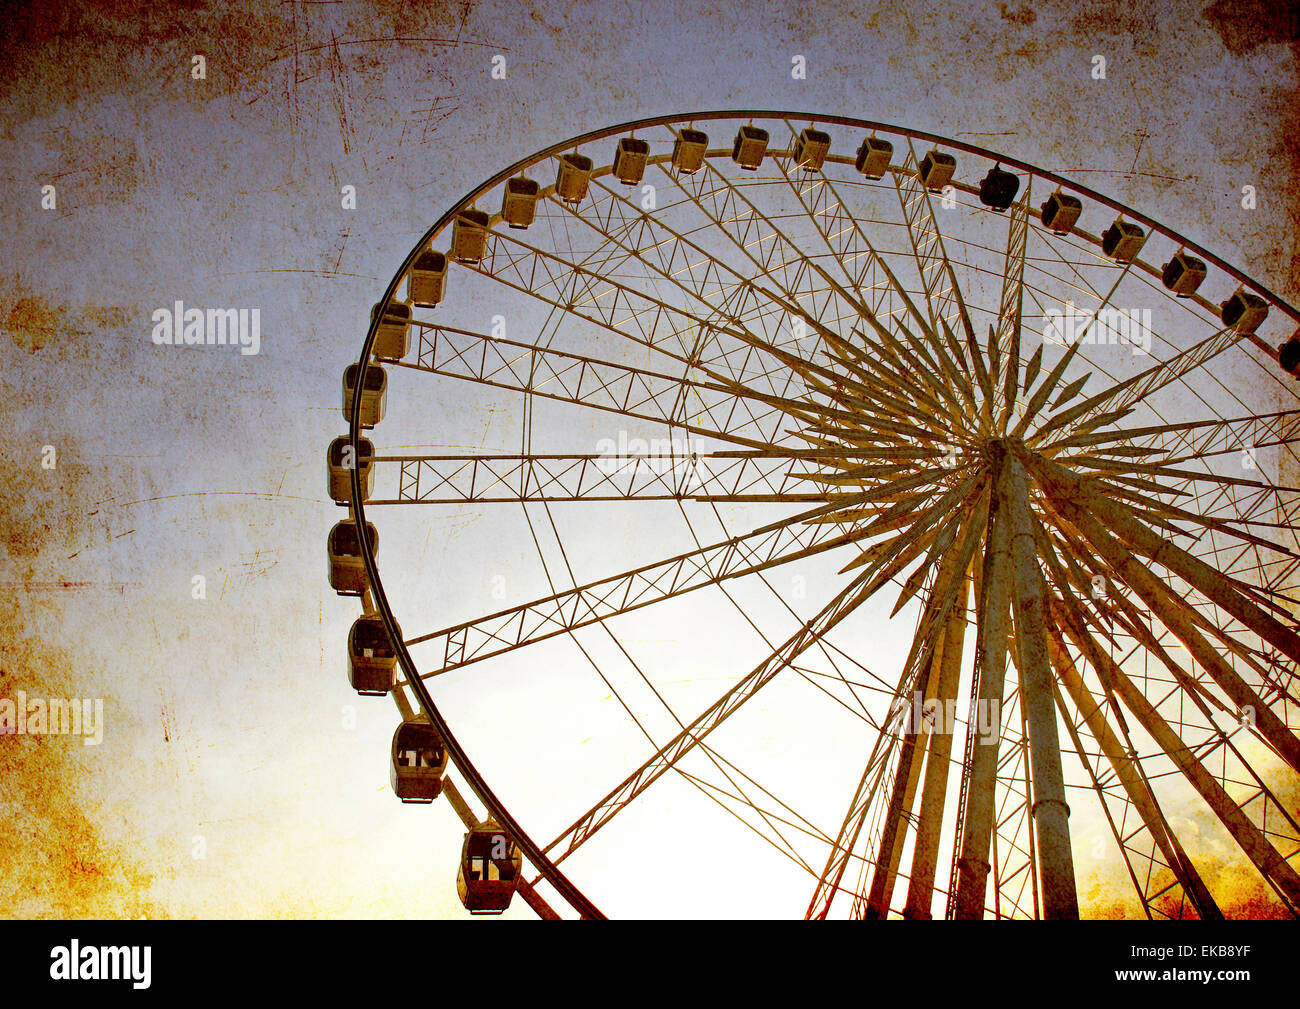 Ferris wheel with blue sky, photo in old image style Stock Photo